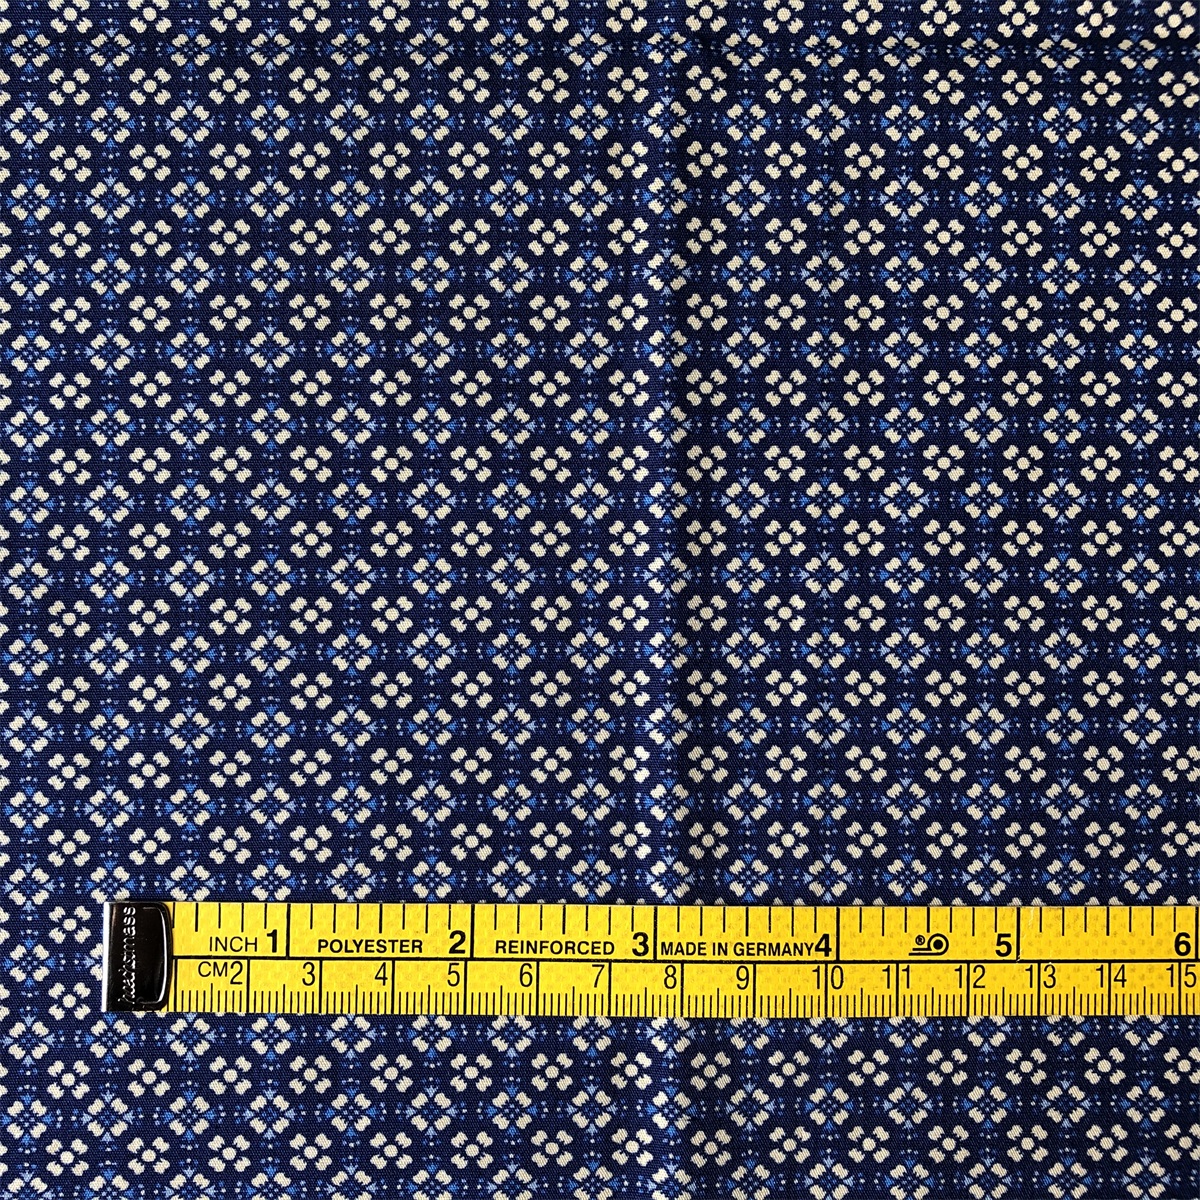 Sun-rising Textile Cotton fabric soft breathable 100% cotton poplin printed shirts woven fabric for men's casual shirts